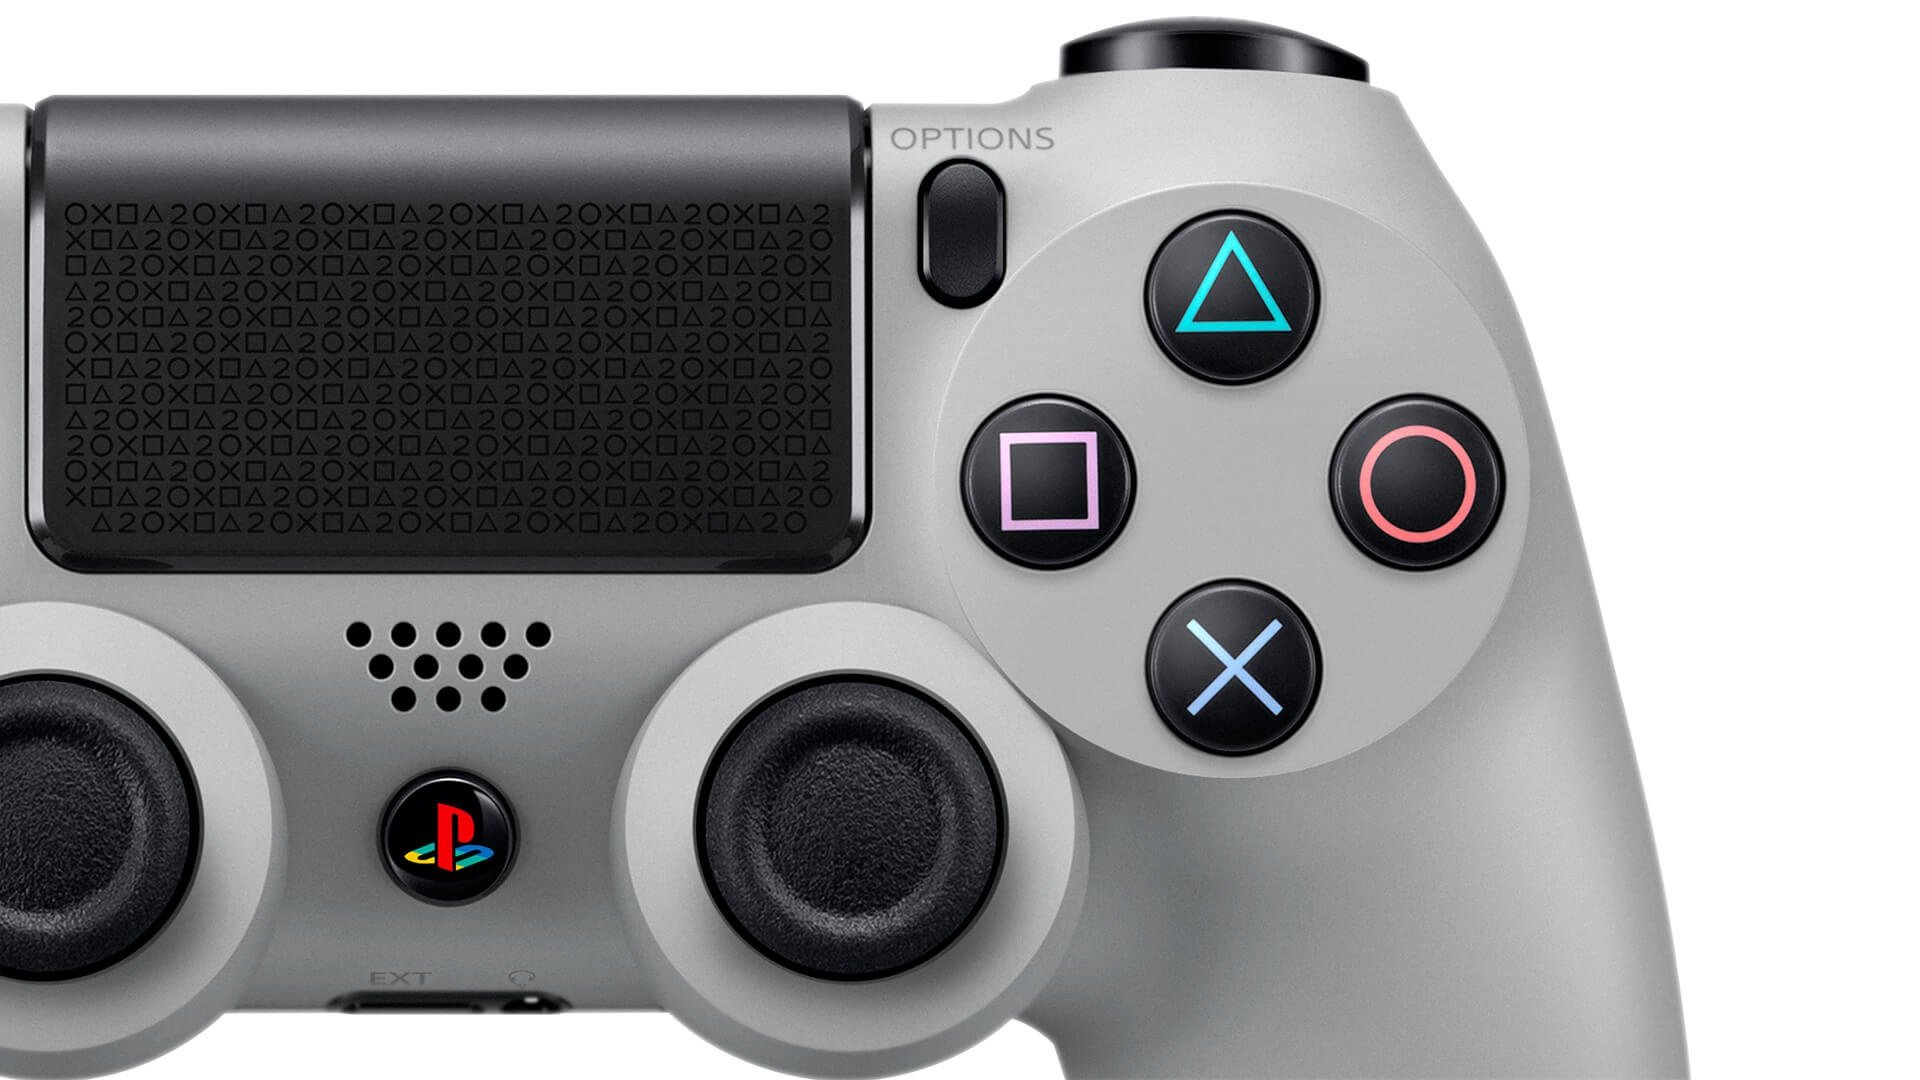 will the ps5 be able to play with ps4